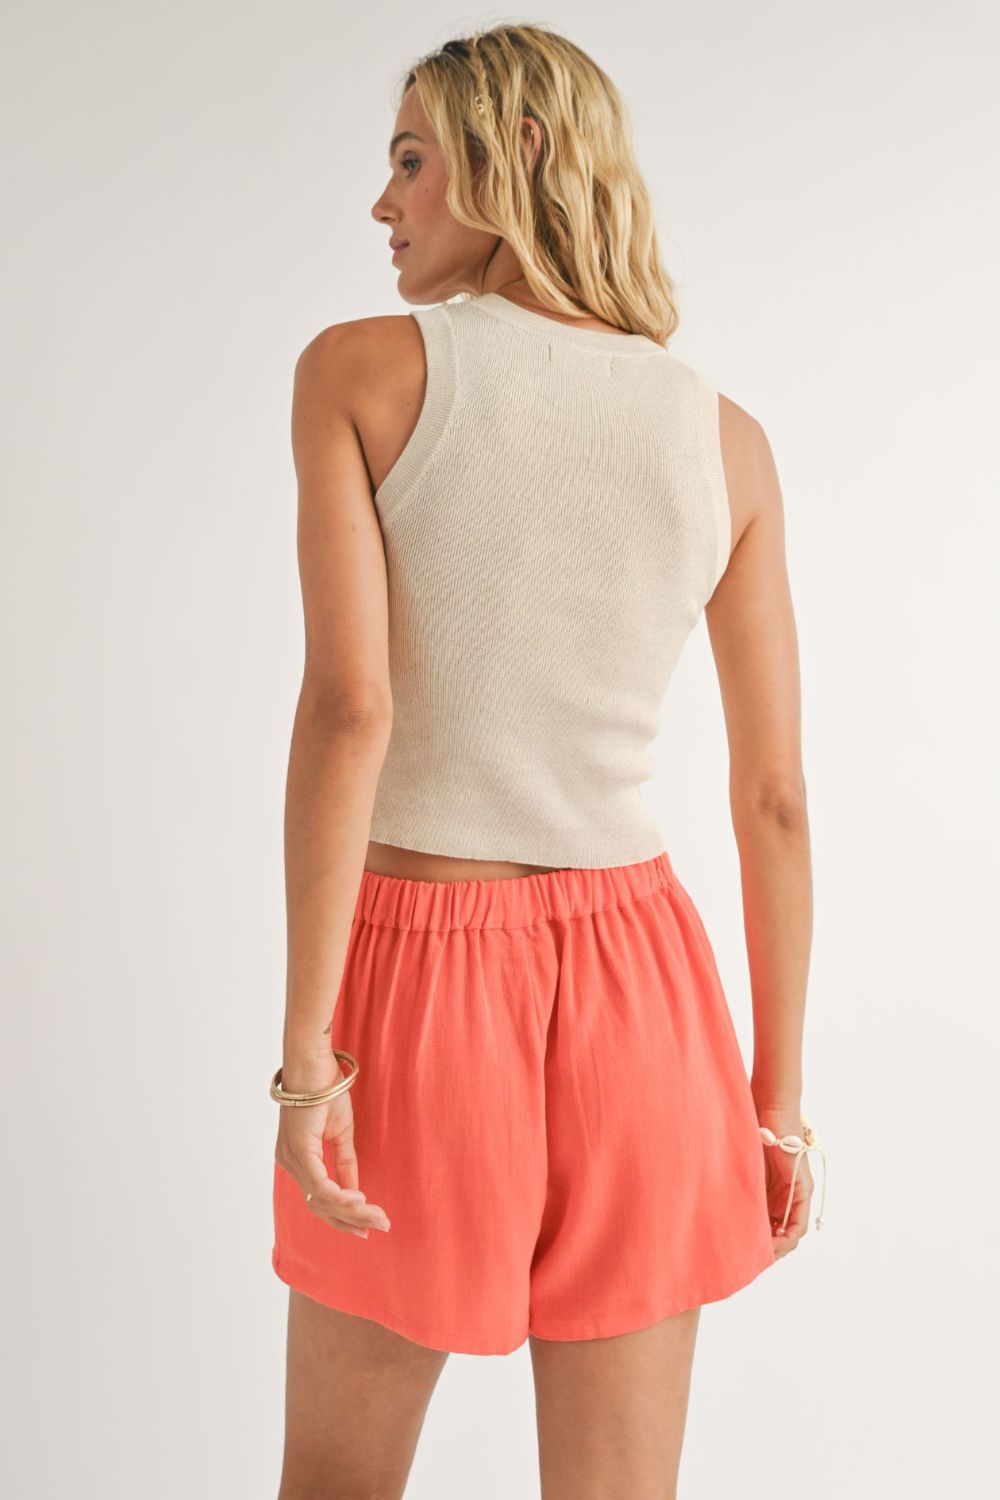 Women&#39;s Soft Knit Tank Sweater Top | Neutral Beige - Women&#39;s Shirts &amp; Tops - Blooming Daily